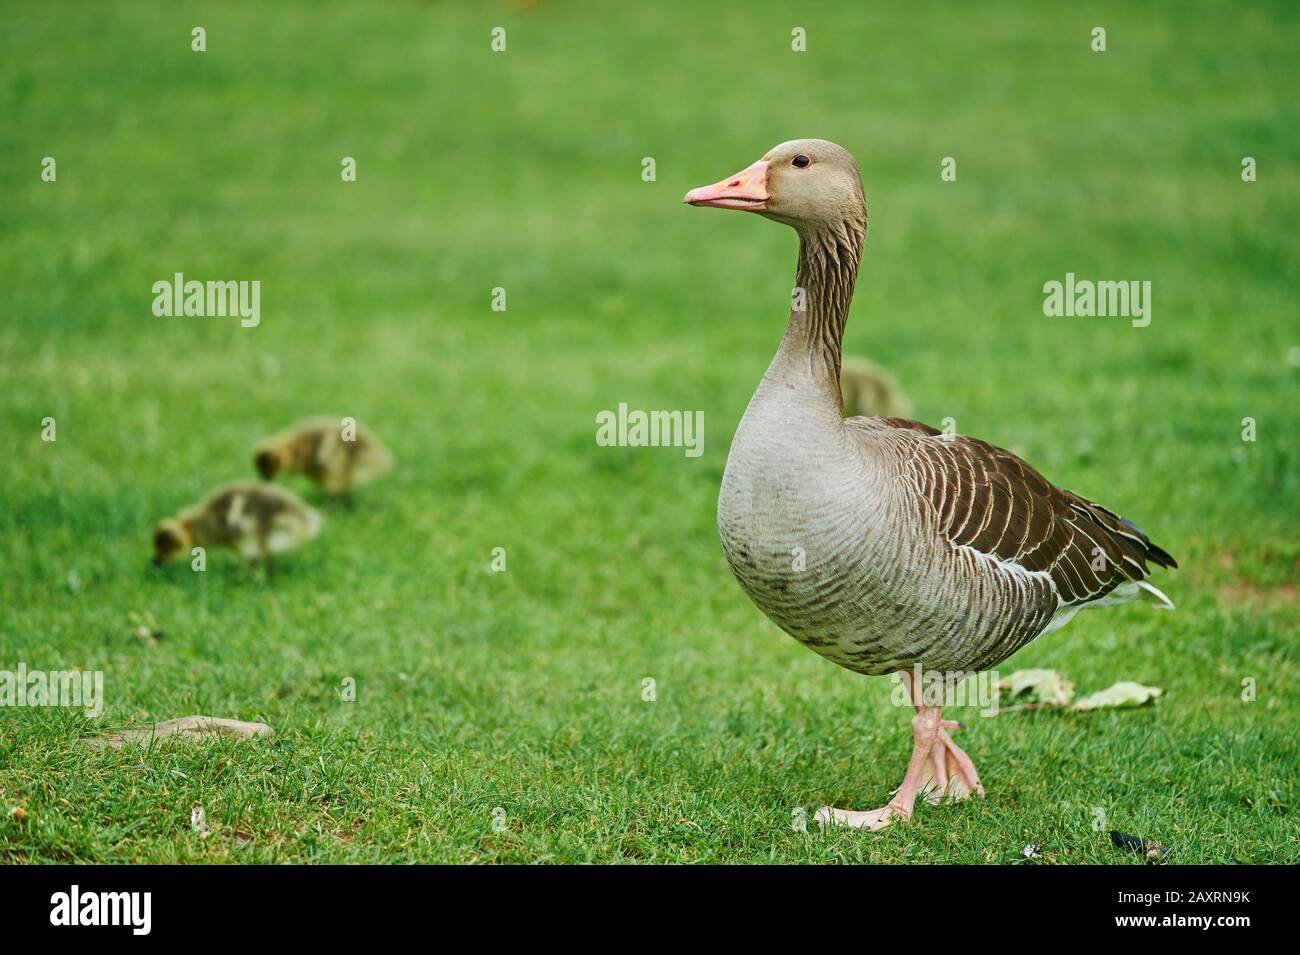 Greylag Goose, Anser anser, meadow, stand Stock Photo